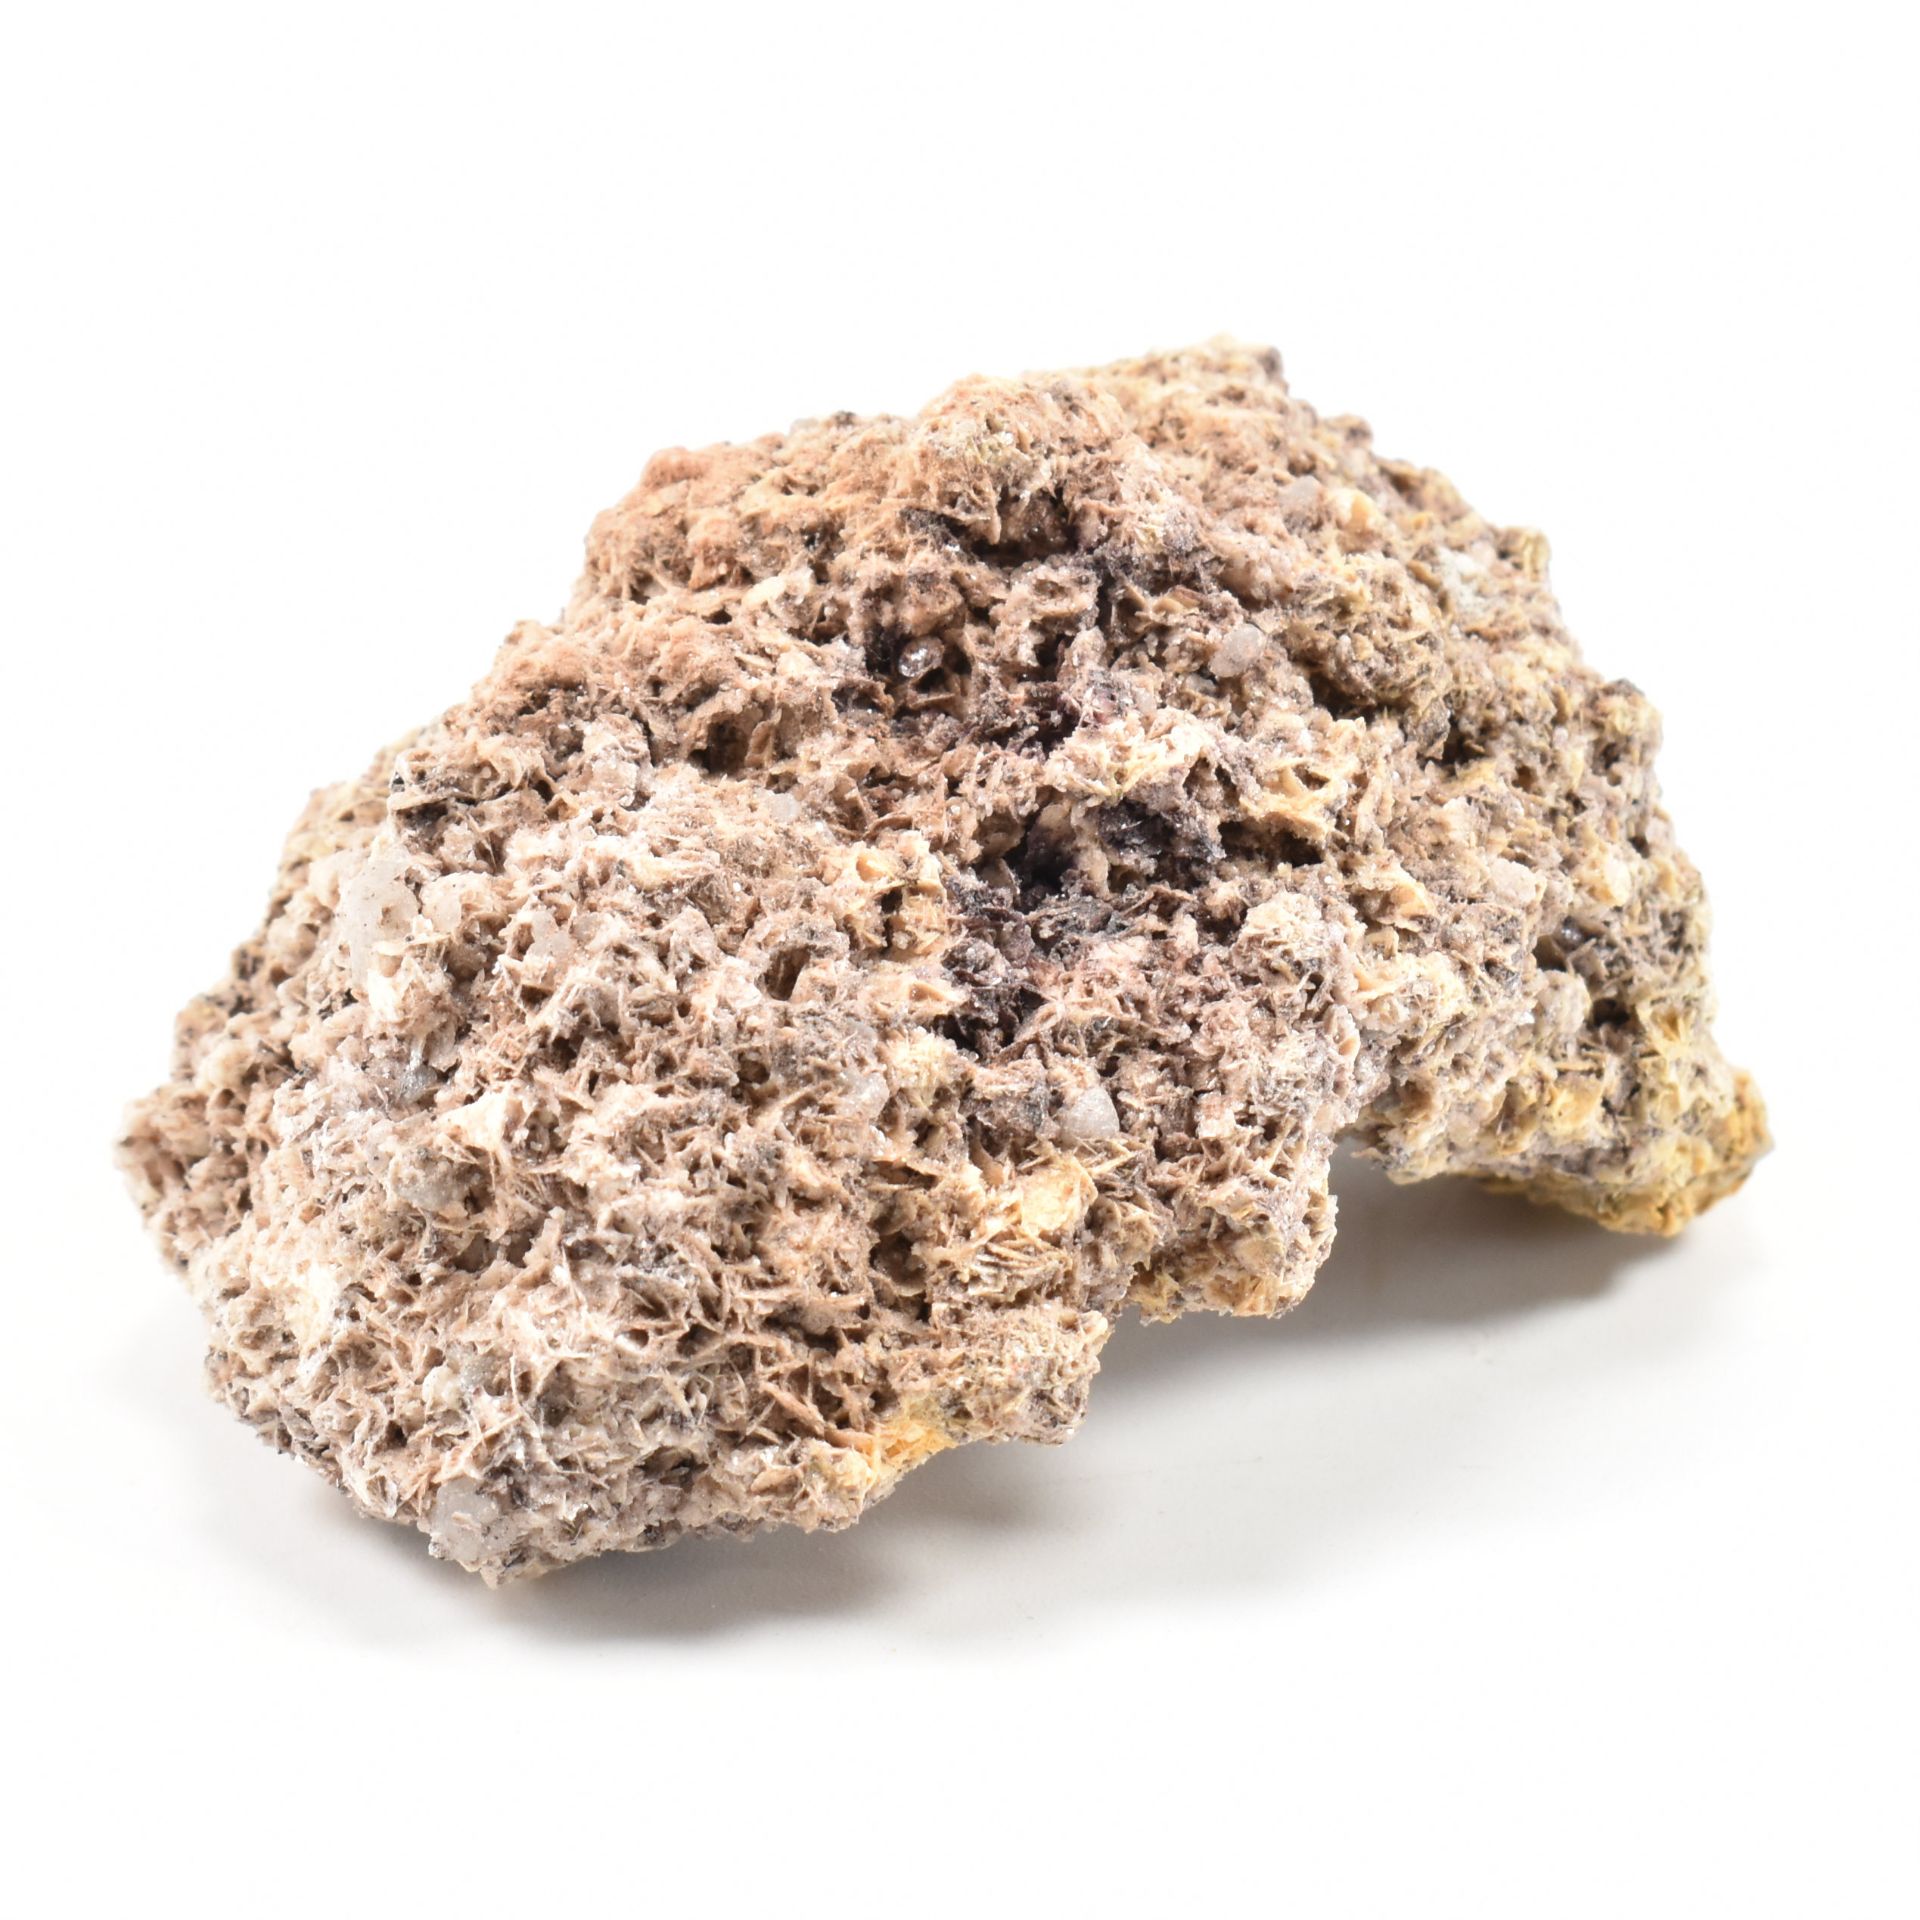 NATURAL HISTORY - GEODE & MINERALS - Image 12 of 12